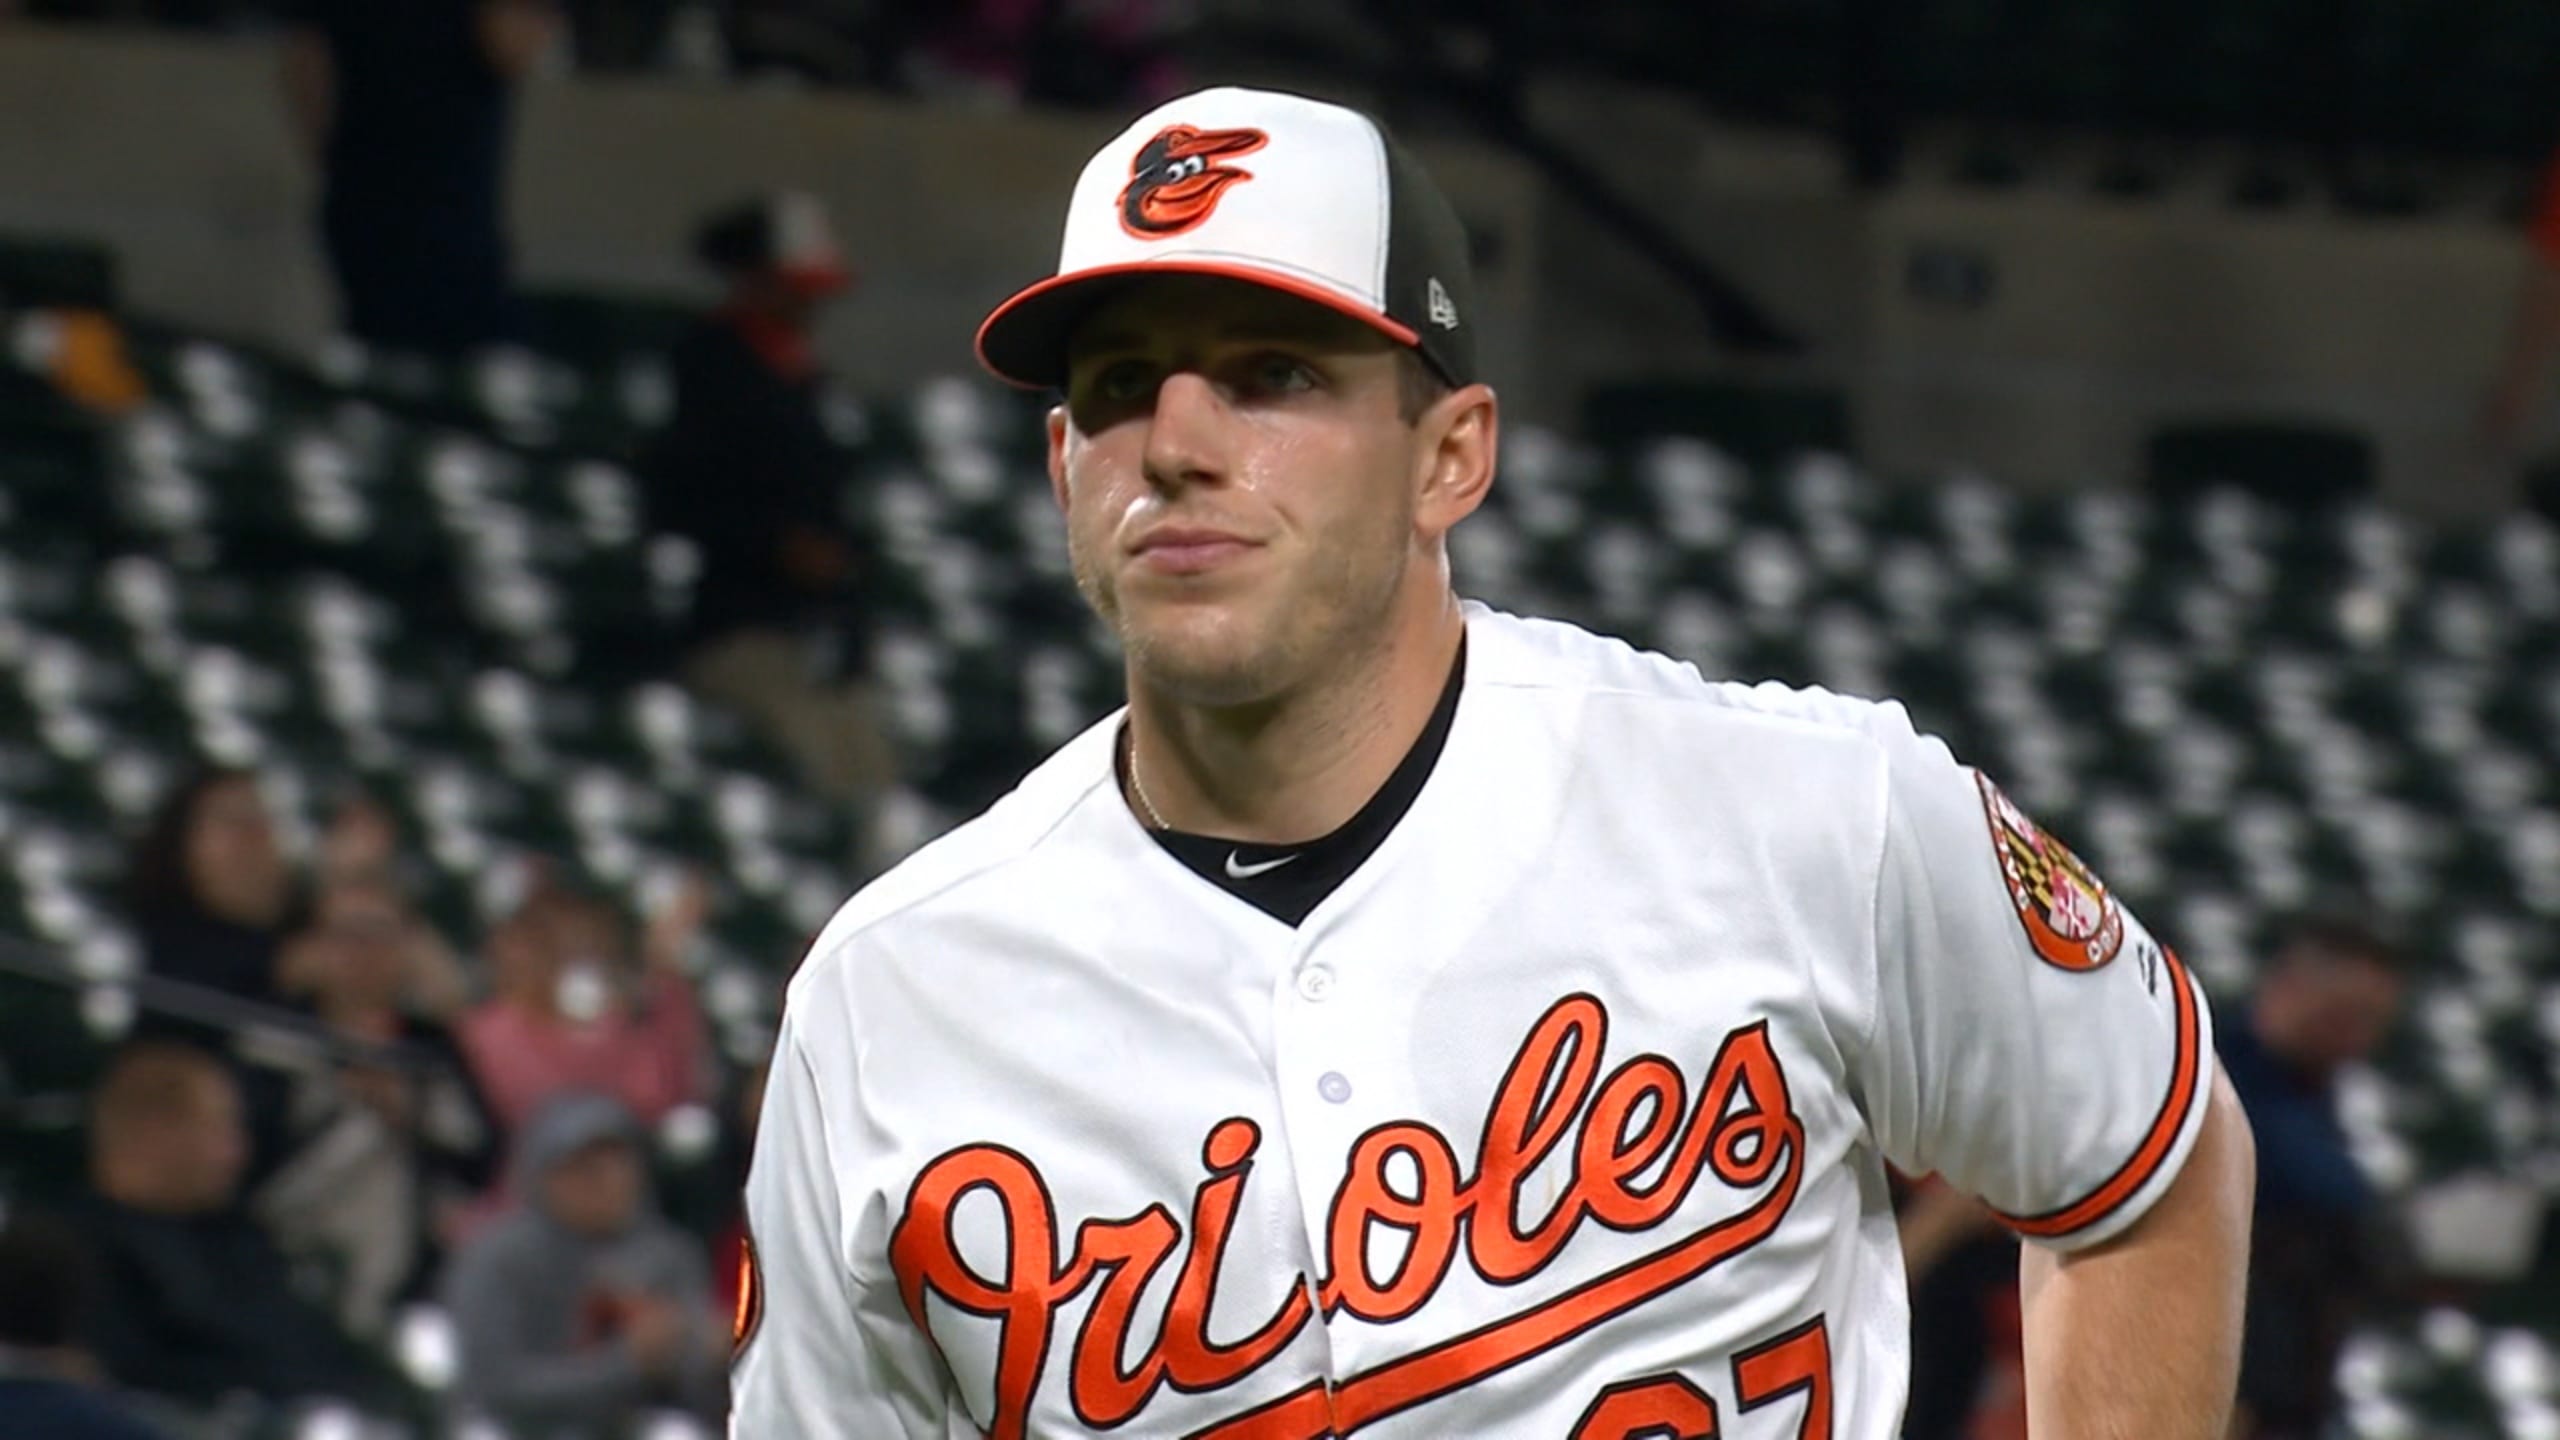 Orioles rookie John Means and his change-up have had one really